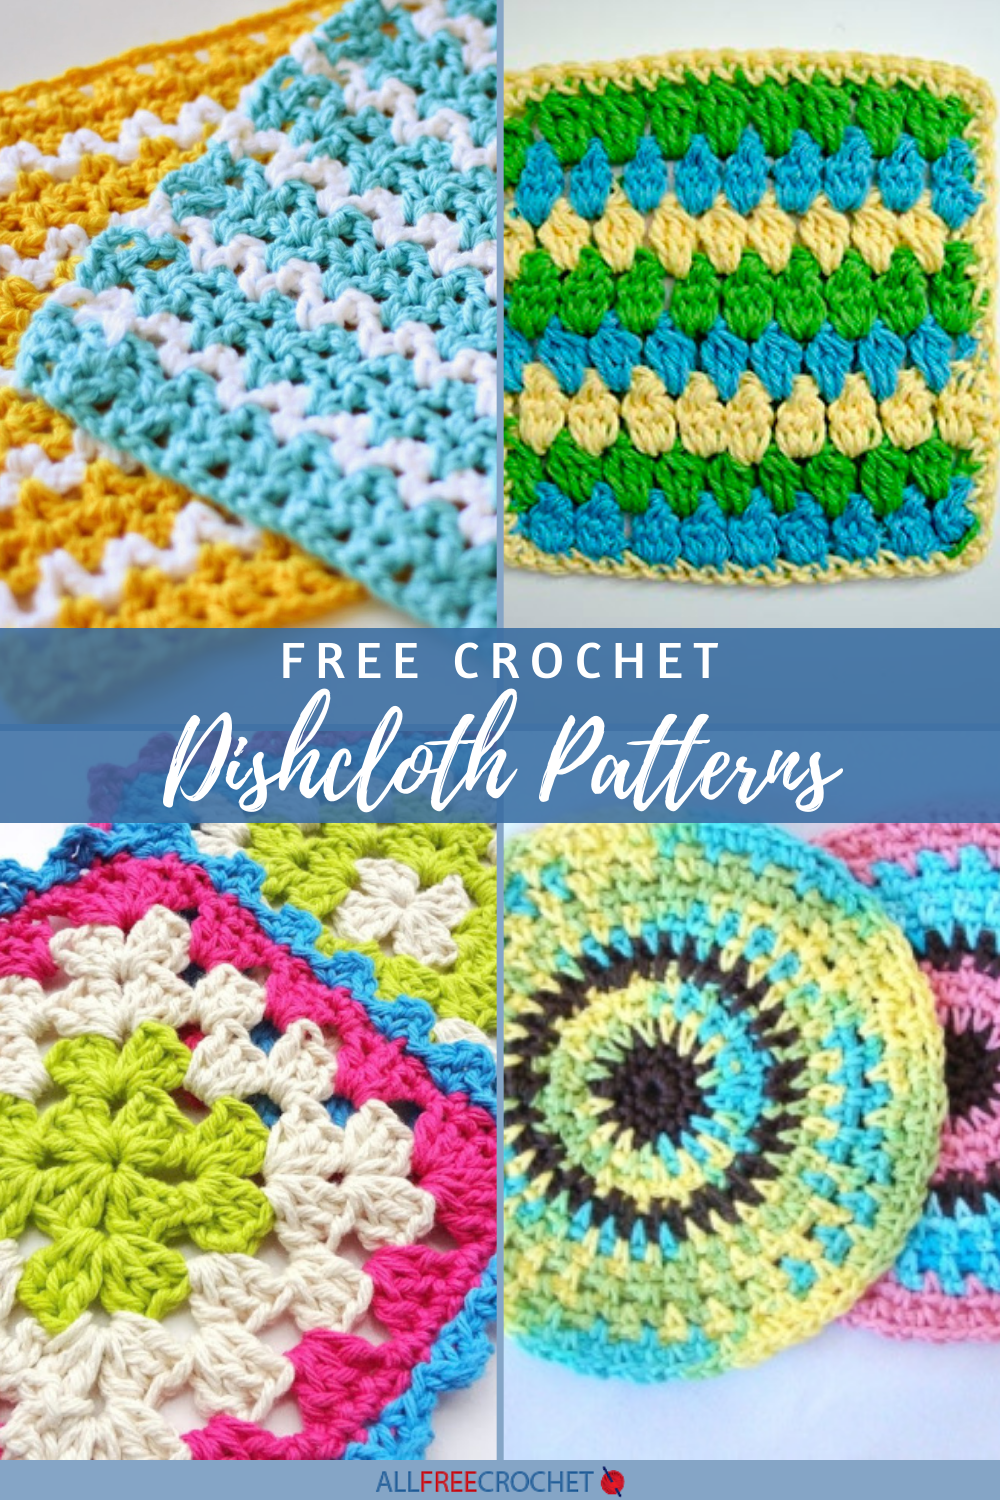 https://irepo.primecp.com/2021/03/486218/Free-Crochet-Dishcloth-Patterns-pin_UserCommentImage_ID-4223616.png?v=4223616